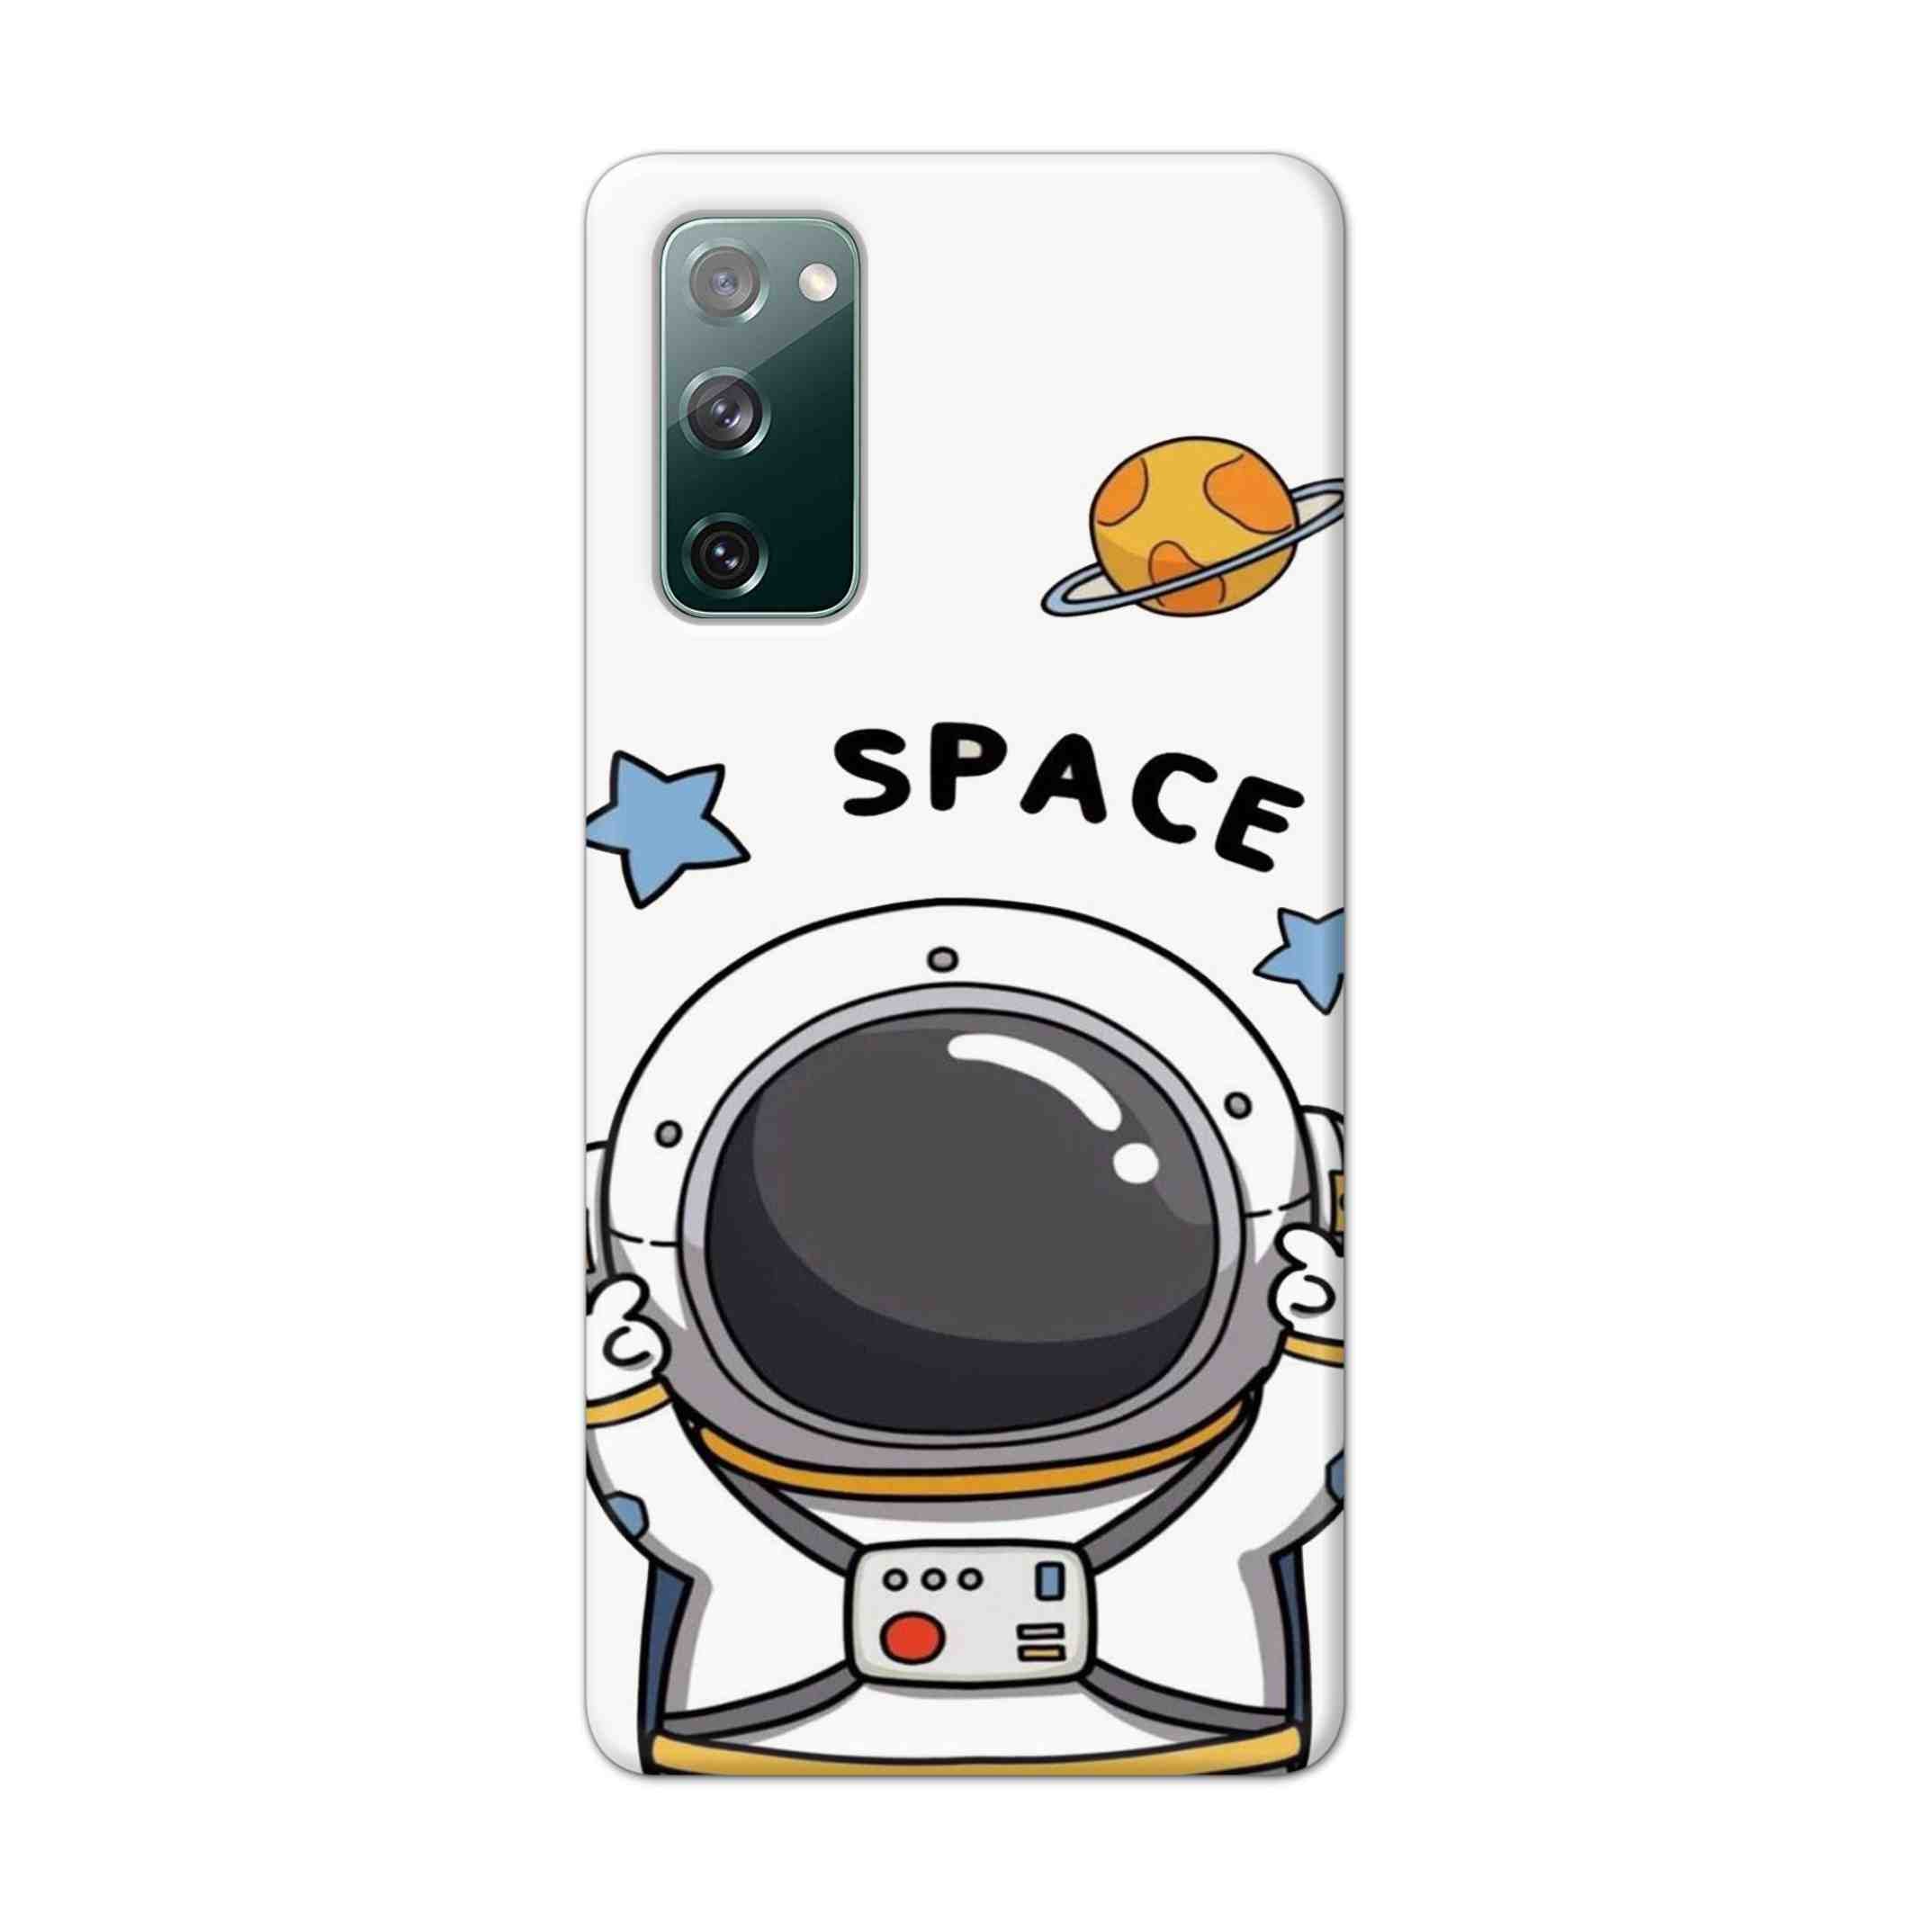 Buy Little Astronaut Hard Back Mobile Phone Case Cover For Samsung Galaxy S20 FE Online